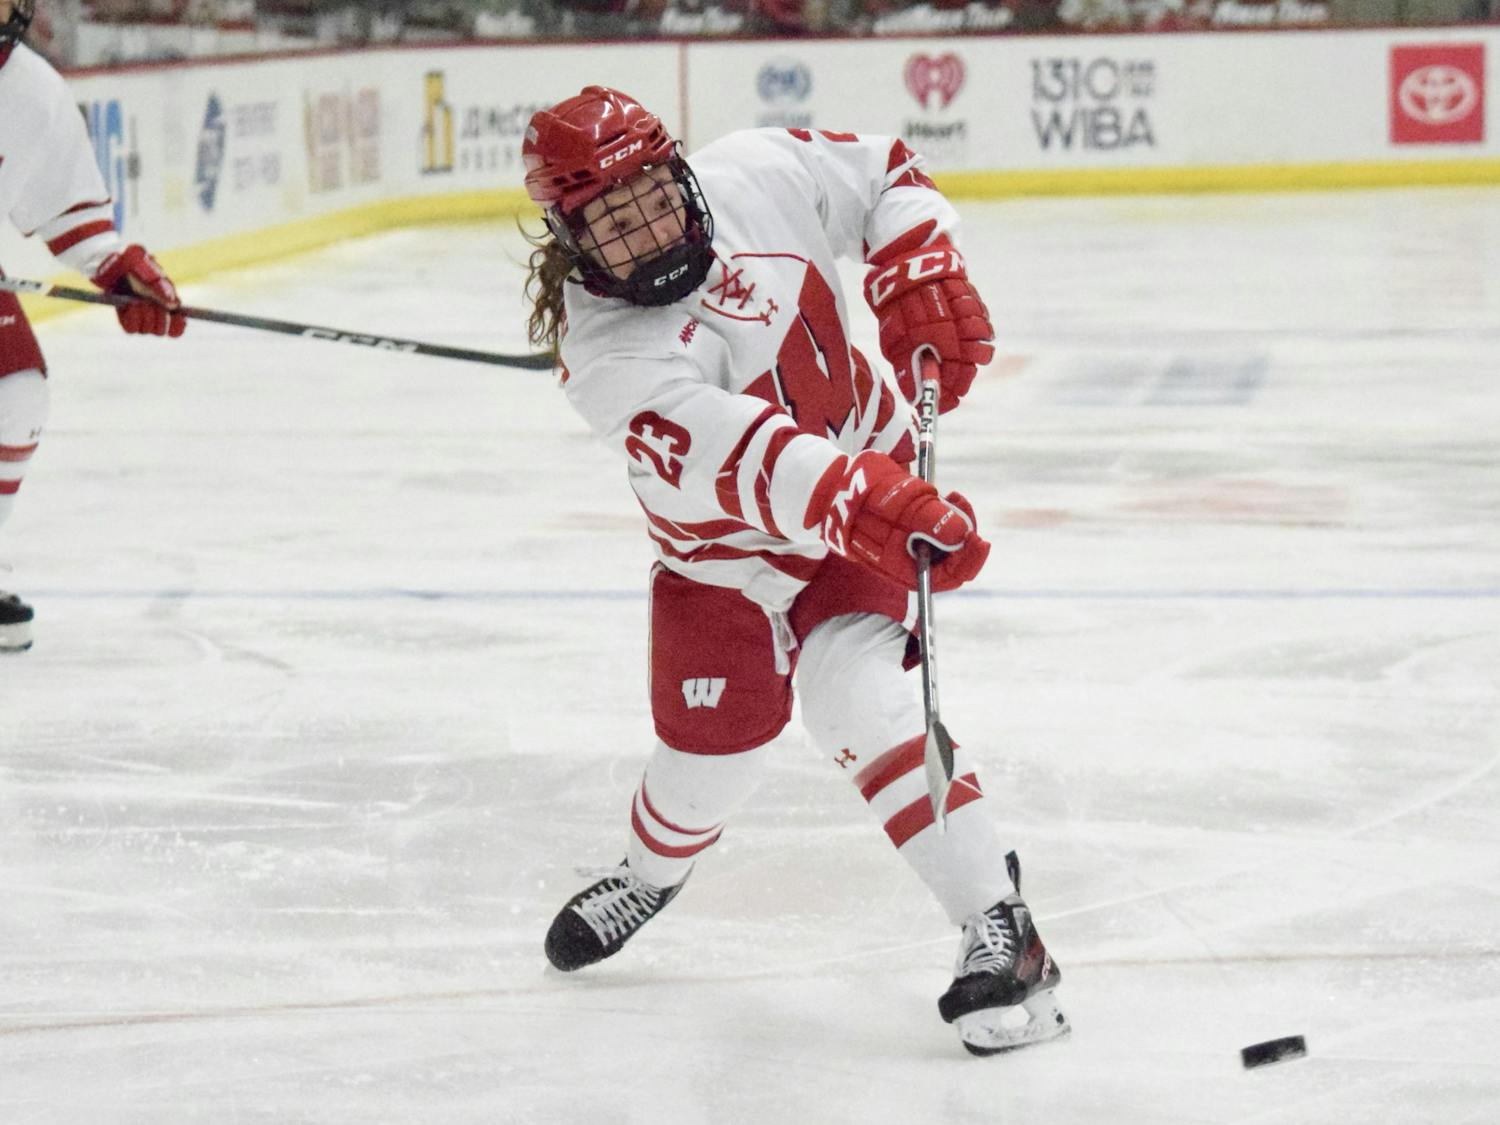 PHOTOS: Wisconsin Women's Hockey celebrate another win, defeating Minnesota State, 6-0